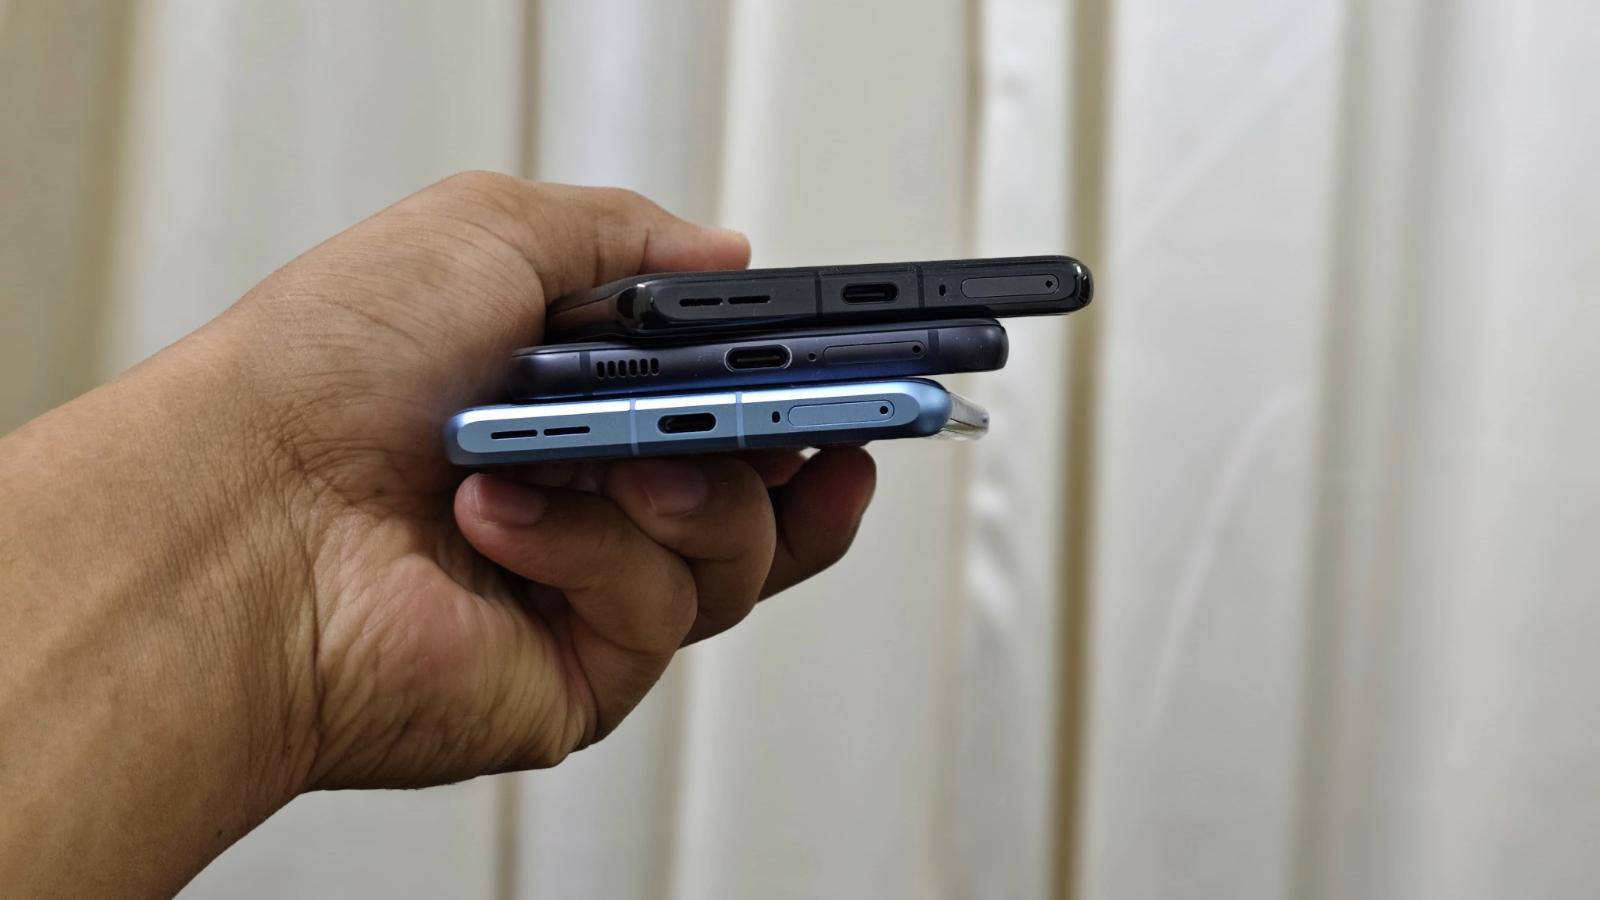 Image shows three smartphones on top of each with their charging port visible.